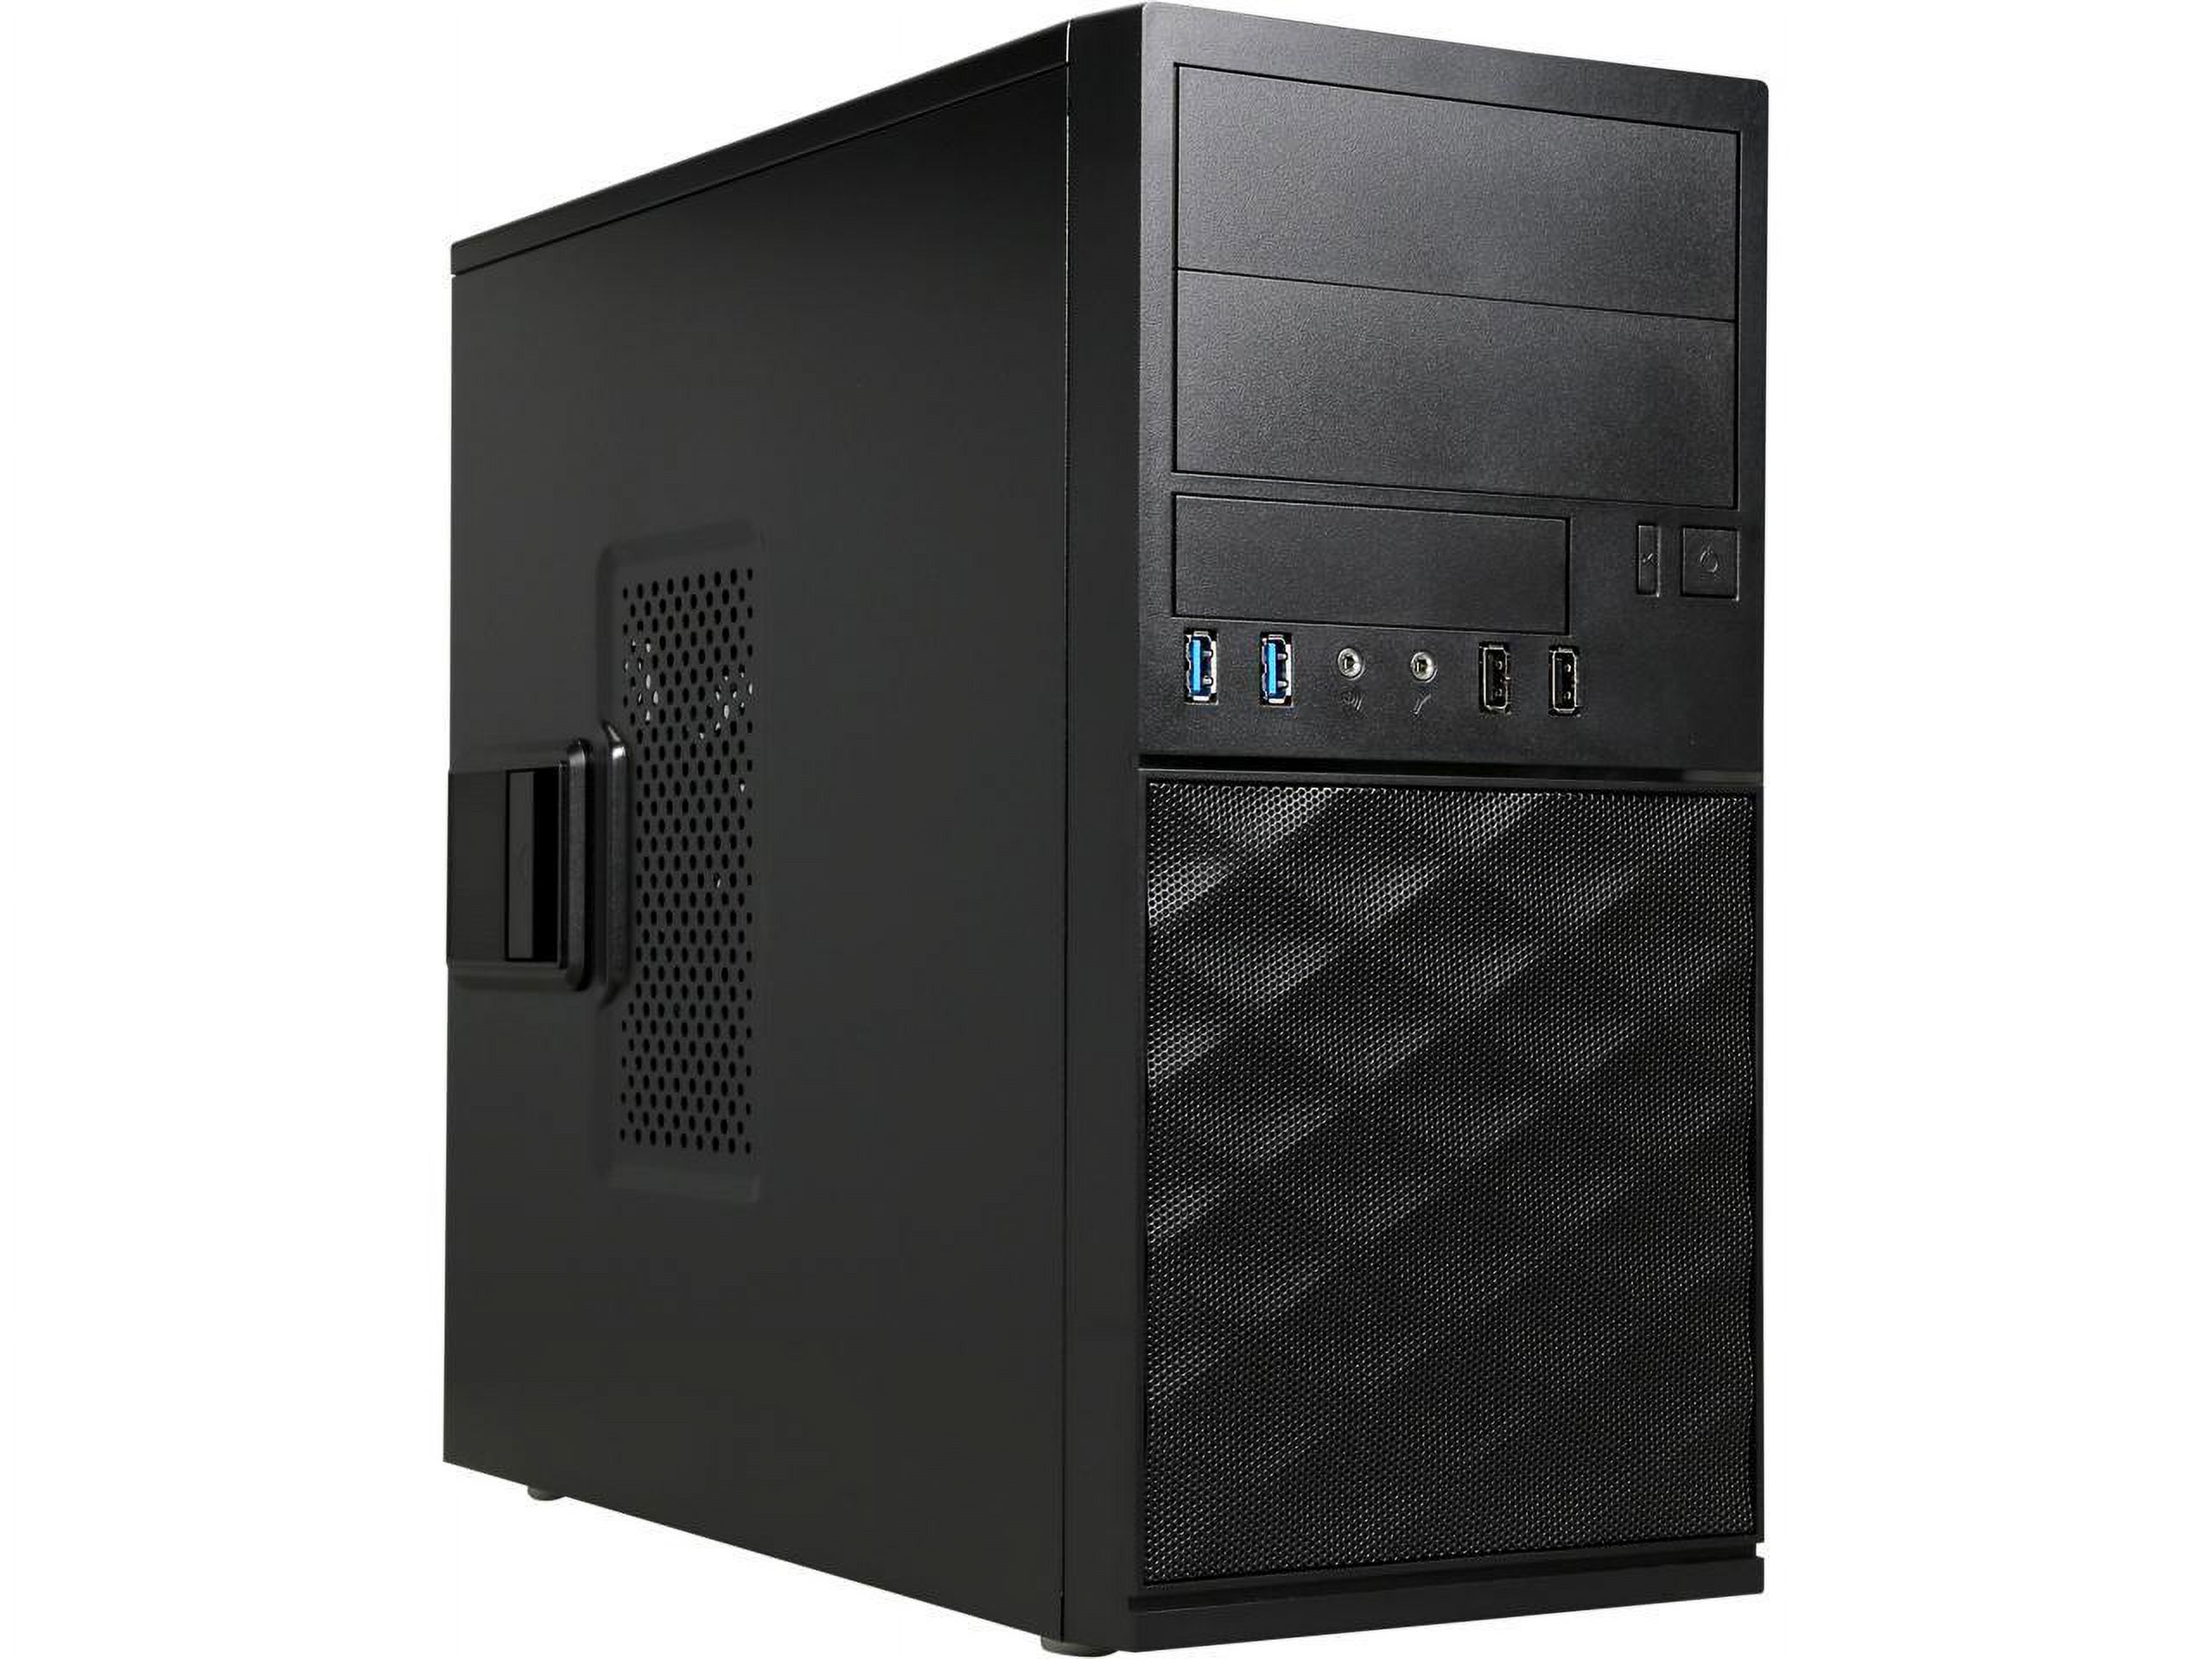 IN WIN EFS052.CH450TB3 Black Mini Tower Computer Case MicroATX 12V Form Factor, PSII Size Power Supply - image 1 of 9